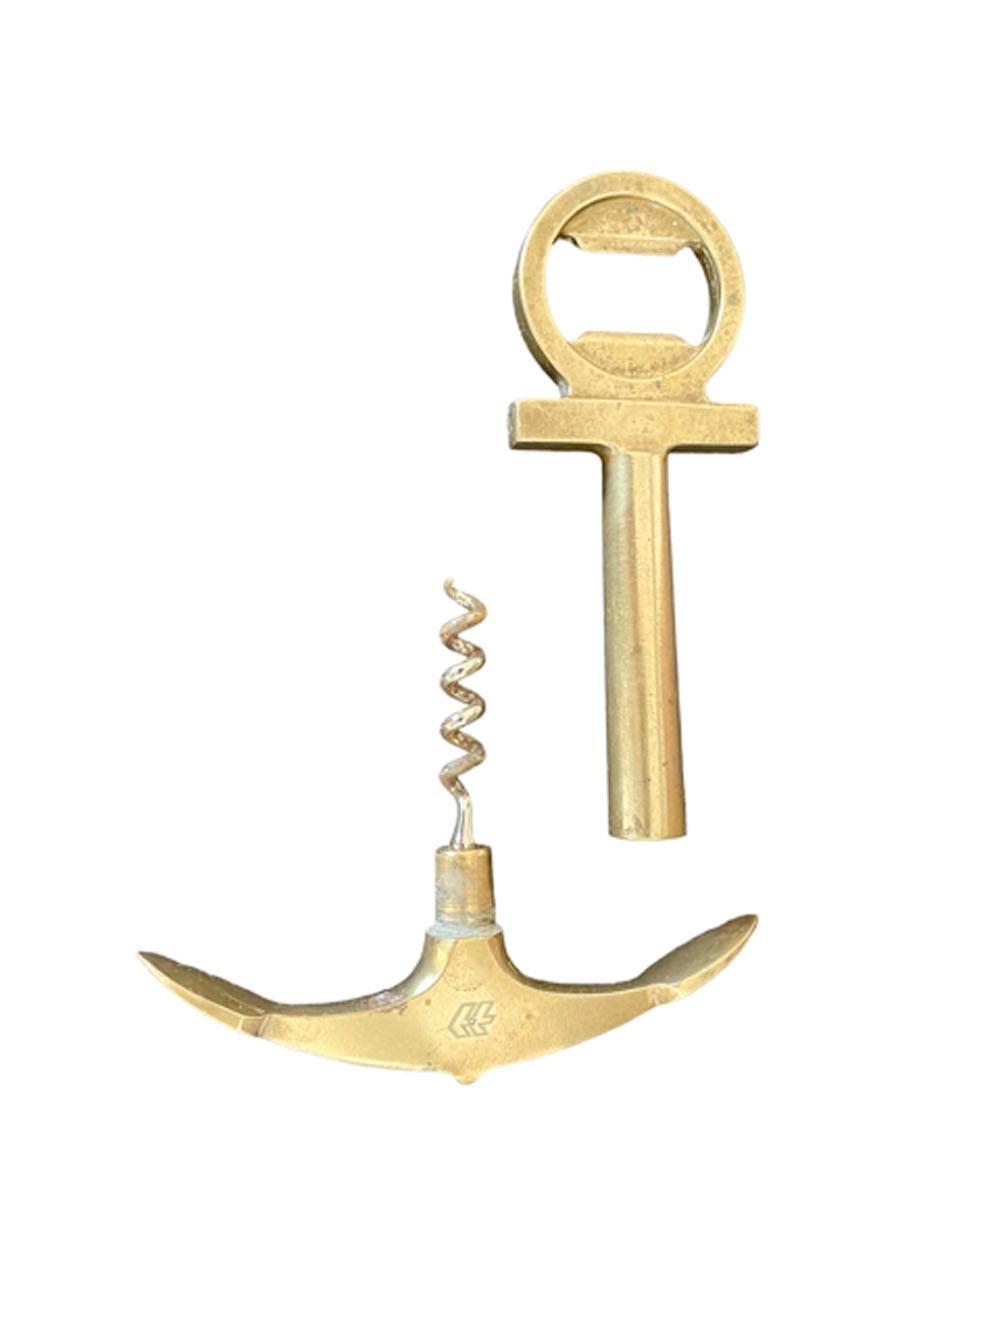 Mid-Century Modern anchor-form bottle opener / corkscrew of solid brass with a steel corkscrew concealed in the shank.